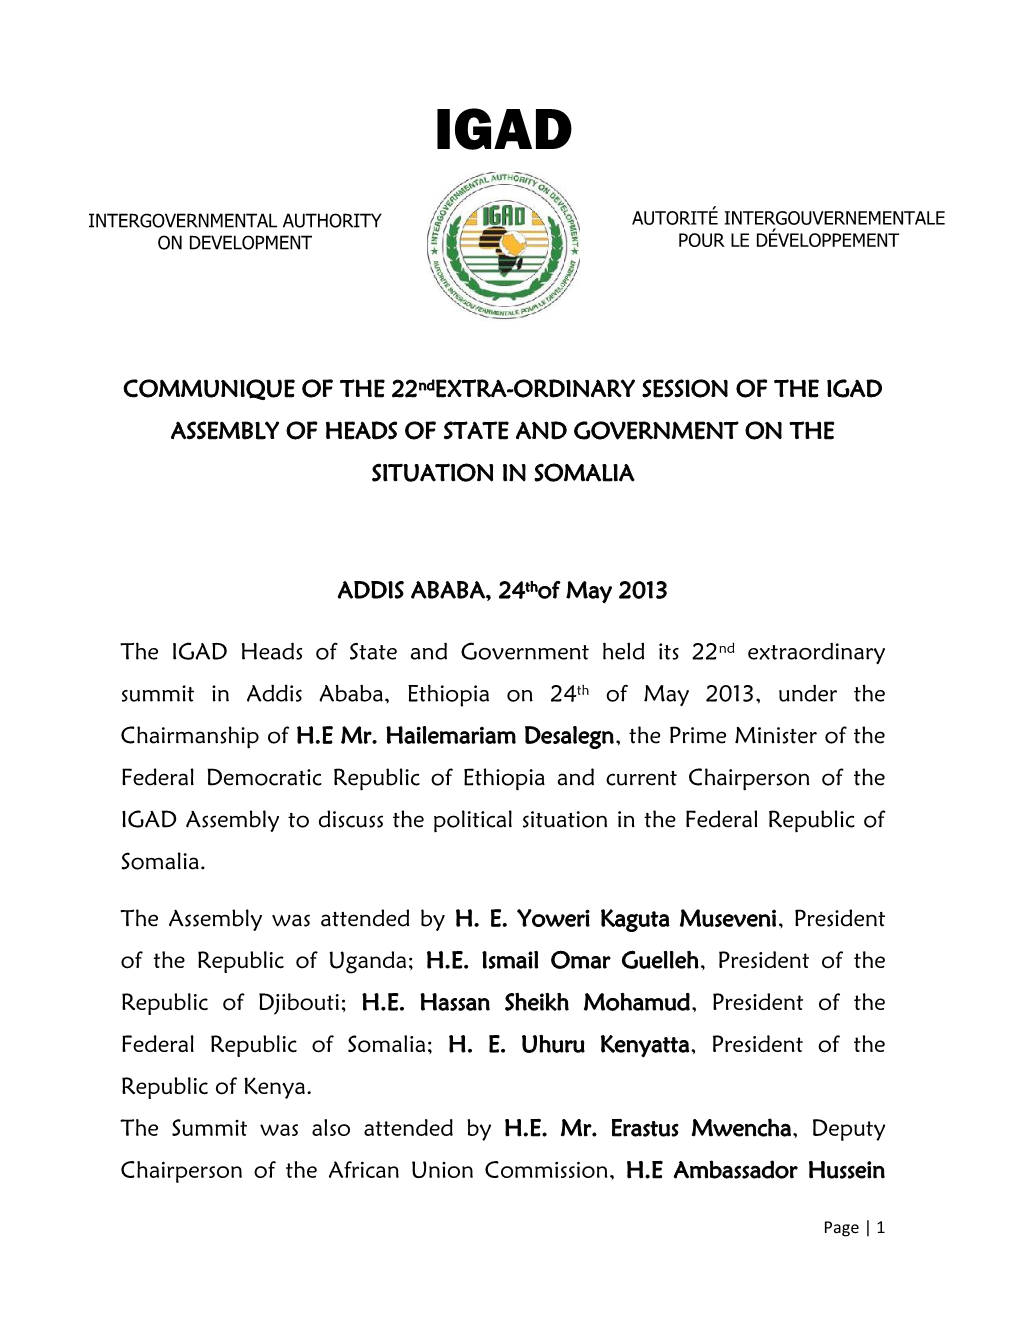 Communique of the 22Nd IGAD Extra-Ordinary Summit.Pdf